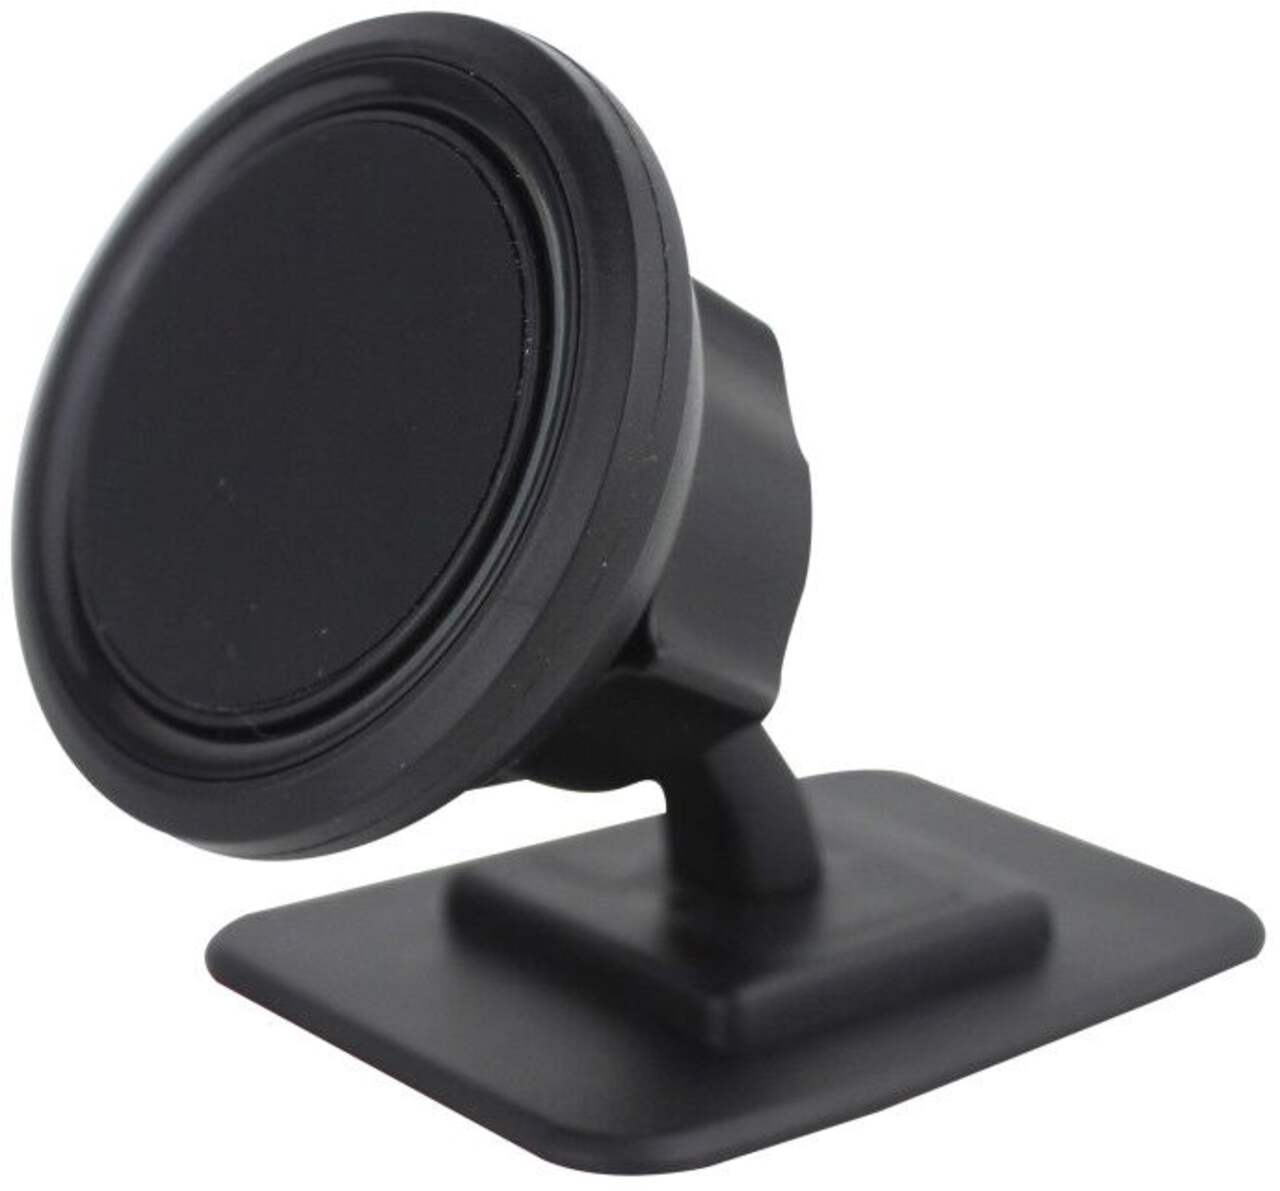 Bluehive Magnetic Dashboard Phone Mount for Most Smartphones and Other  Portable Devices, with 360° Swivel Mount